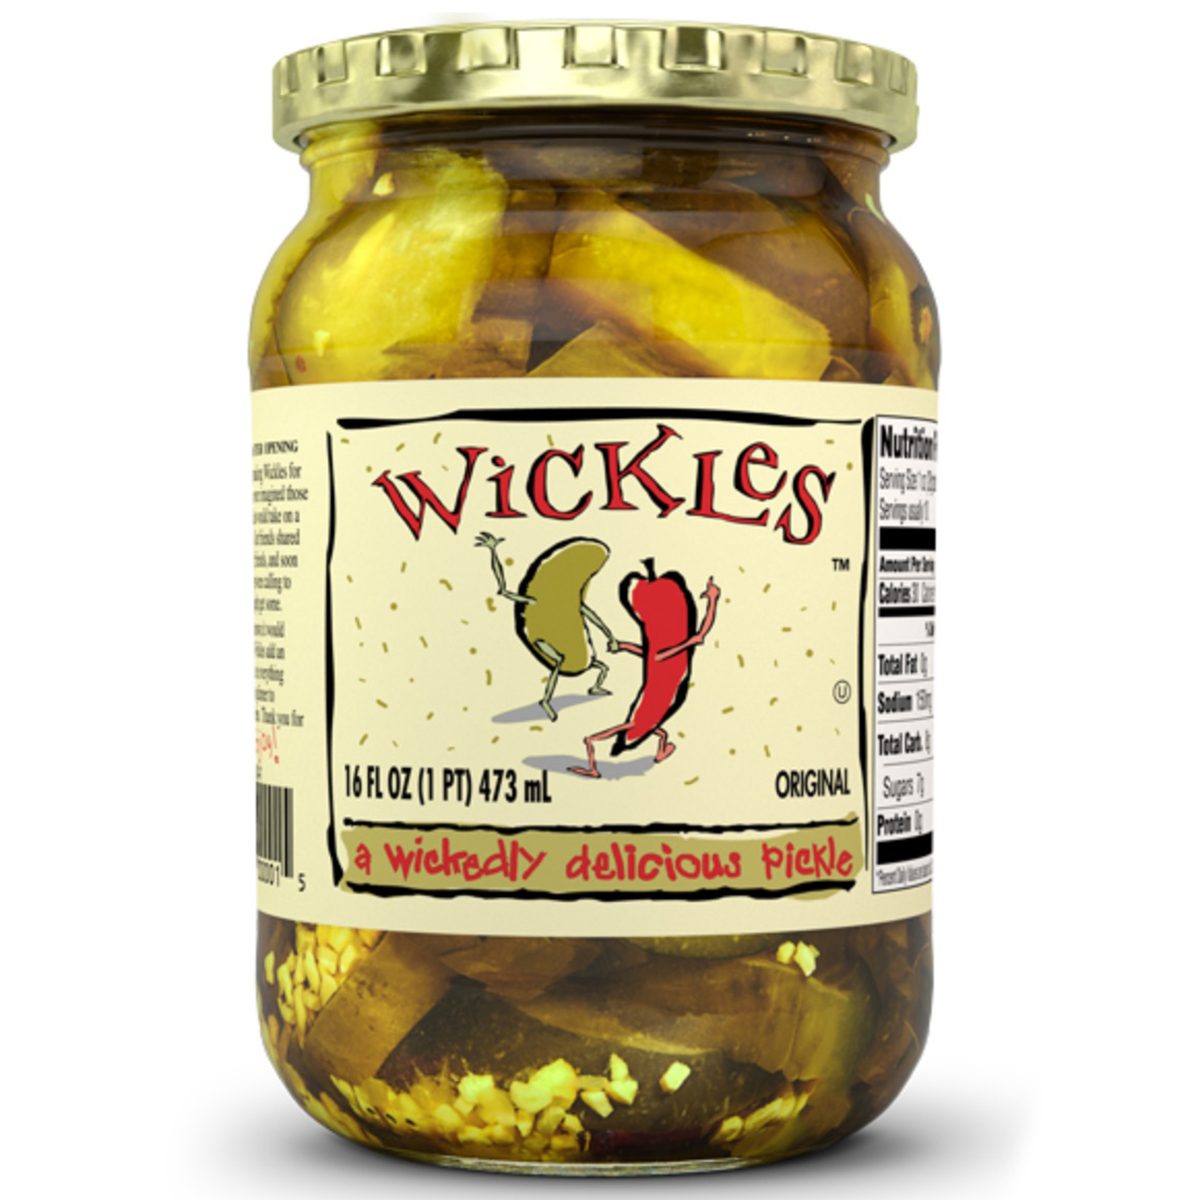 <p><a class="SWhtmlLink" href="https://wicklespickles.com" rel="noopener">Wickles Pickles</a>, Dadeville</p> <p>There are a lot of pickle brands out there, but Wickles Pickles definitely stands out. Every jar is filled with crispy chips and more than a hint of spice! They create a signature Southern-style pickle by using apple cider vinegar brine and bright red chili peppers, along with a few other secret pickle spices. Love pickles? <a href="https://www.tasteofhome.com/article/pickle-ice-cream-is-a-thing/">This new product will blow your mind.</a></p>